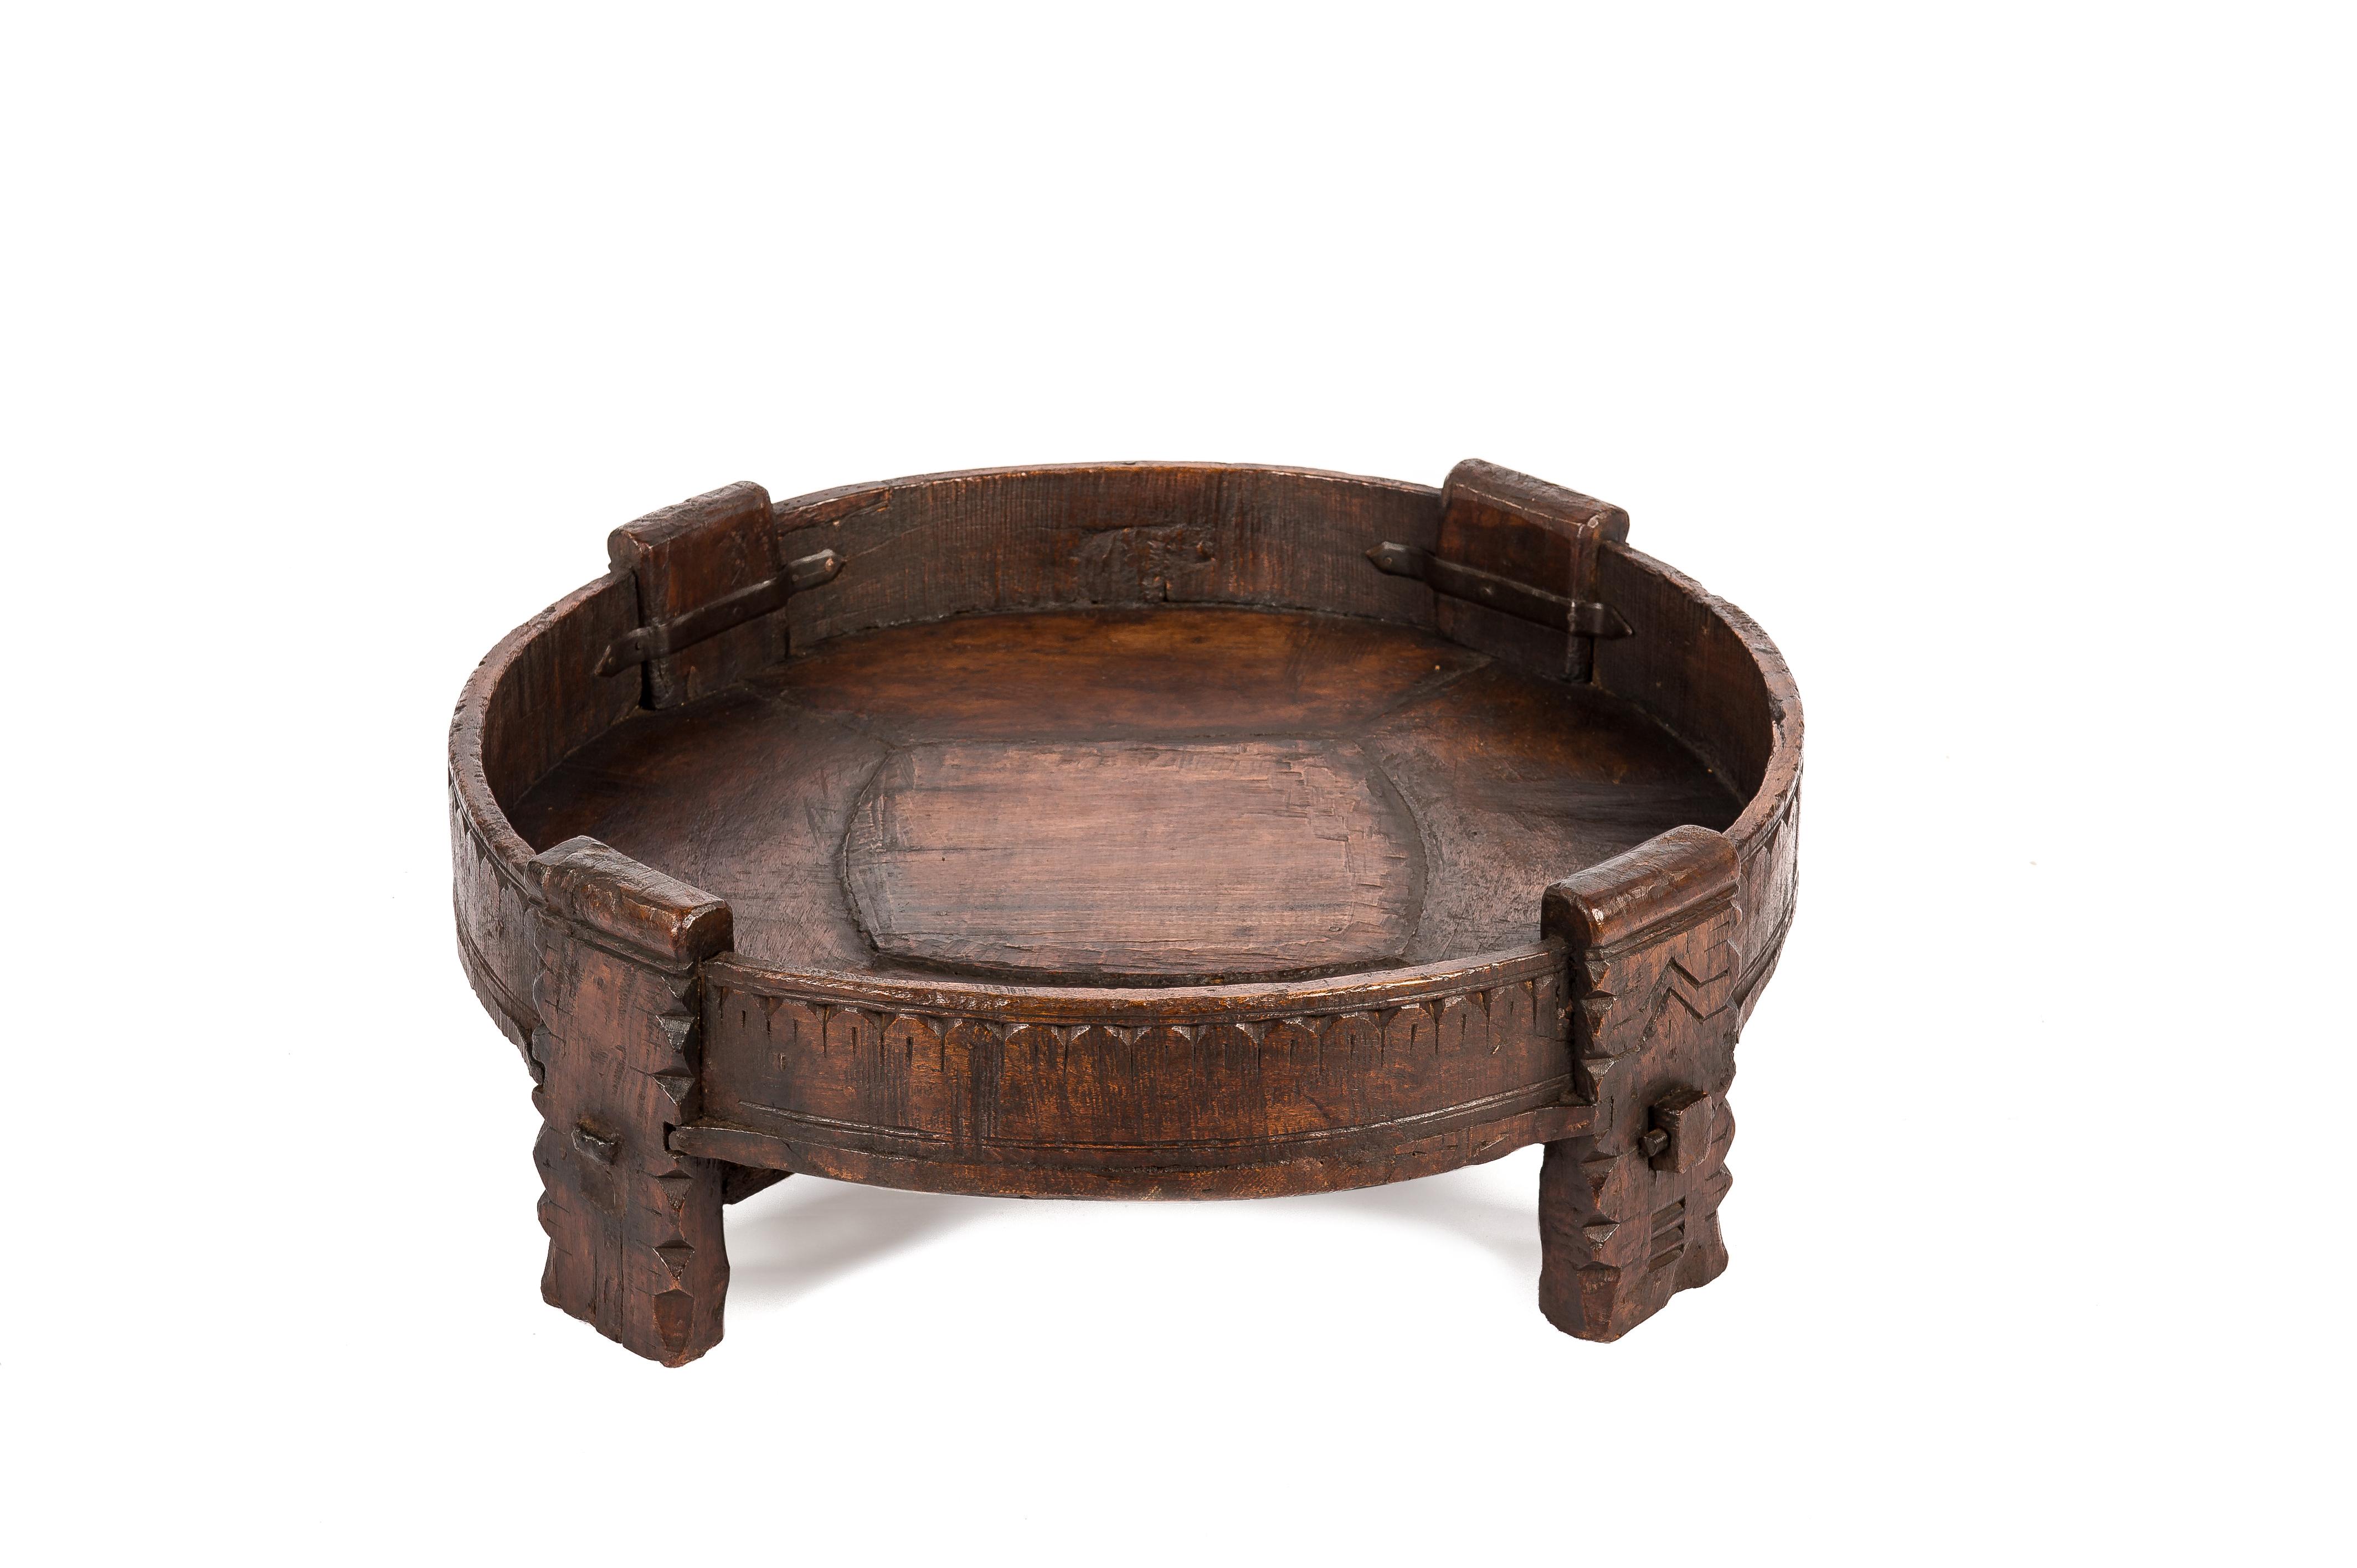 Early 20th Century Round Indian Traditional Carved Grinder or Chakki Table (Indisch) im Angebot